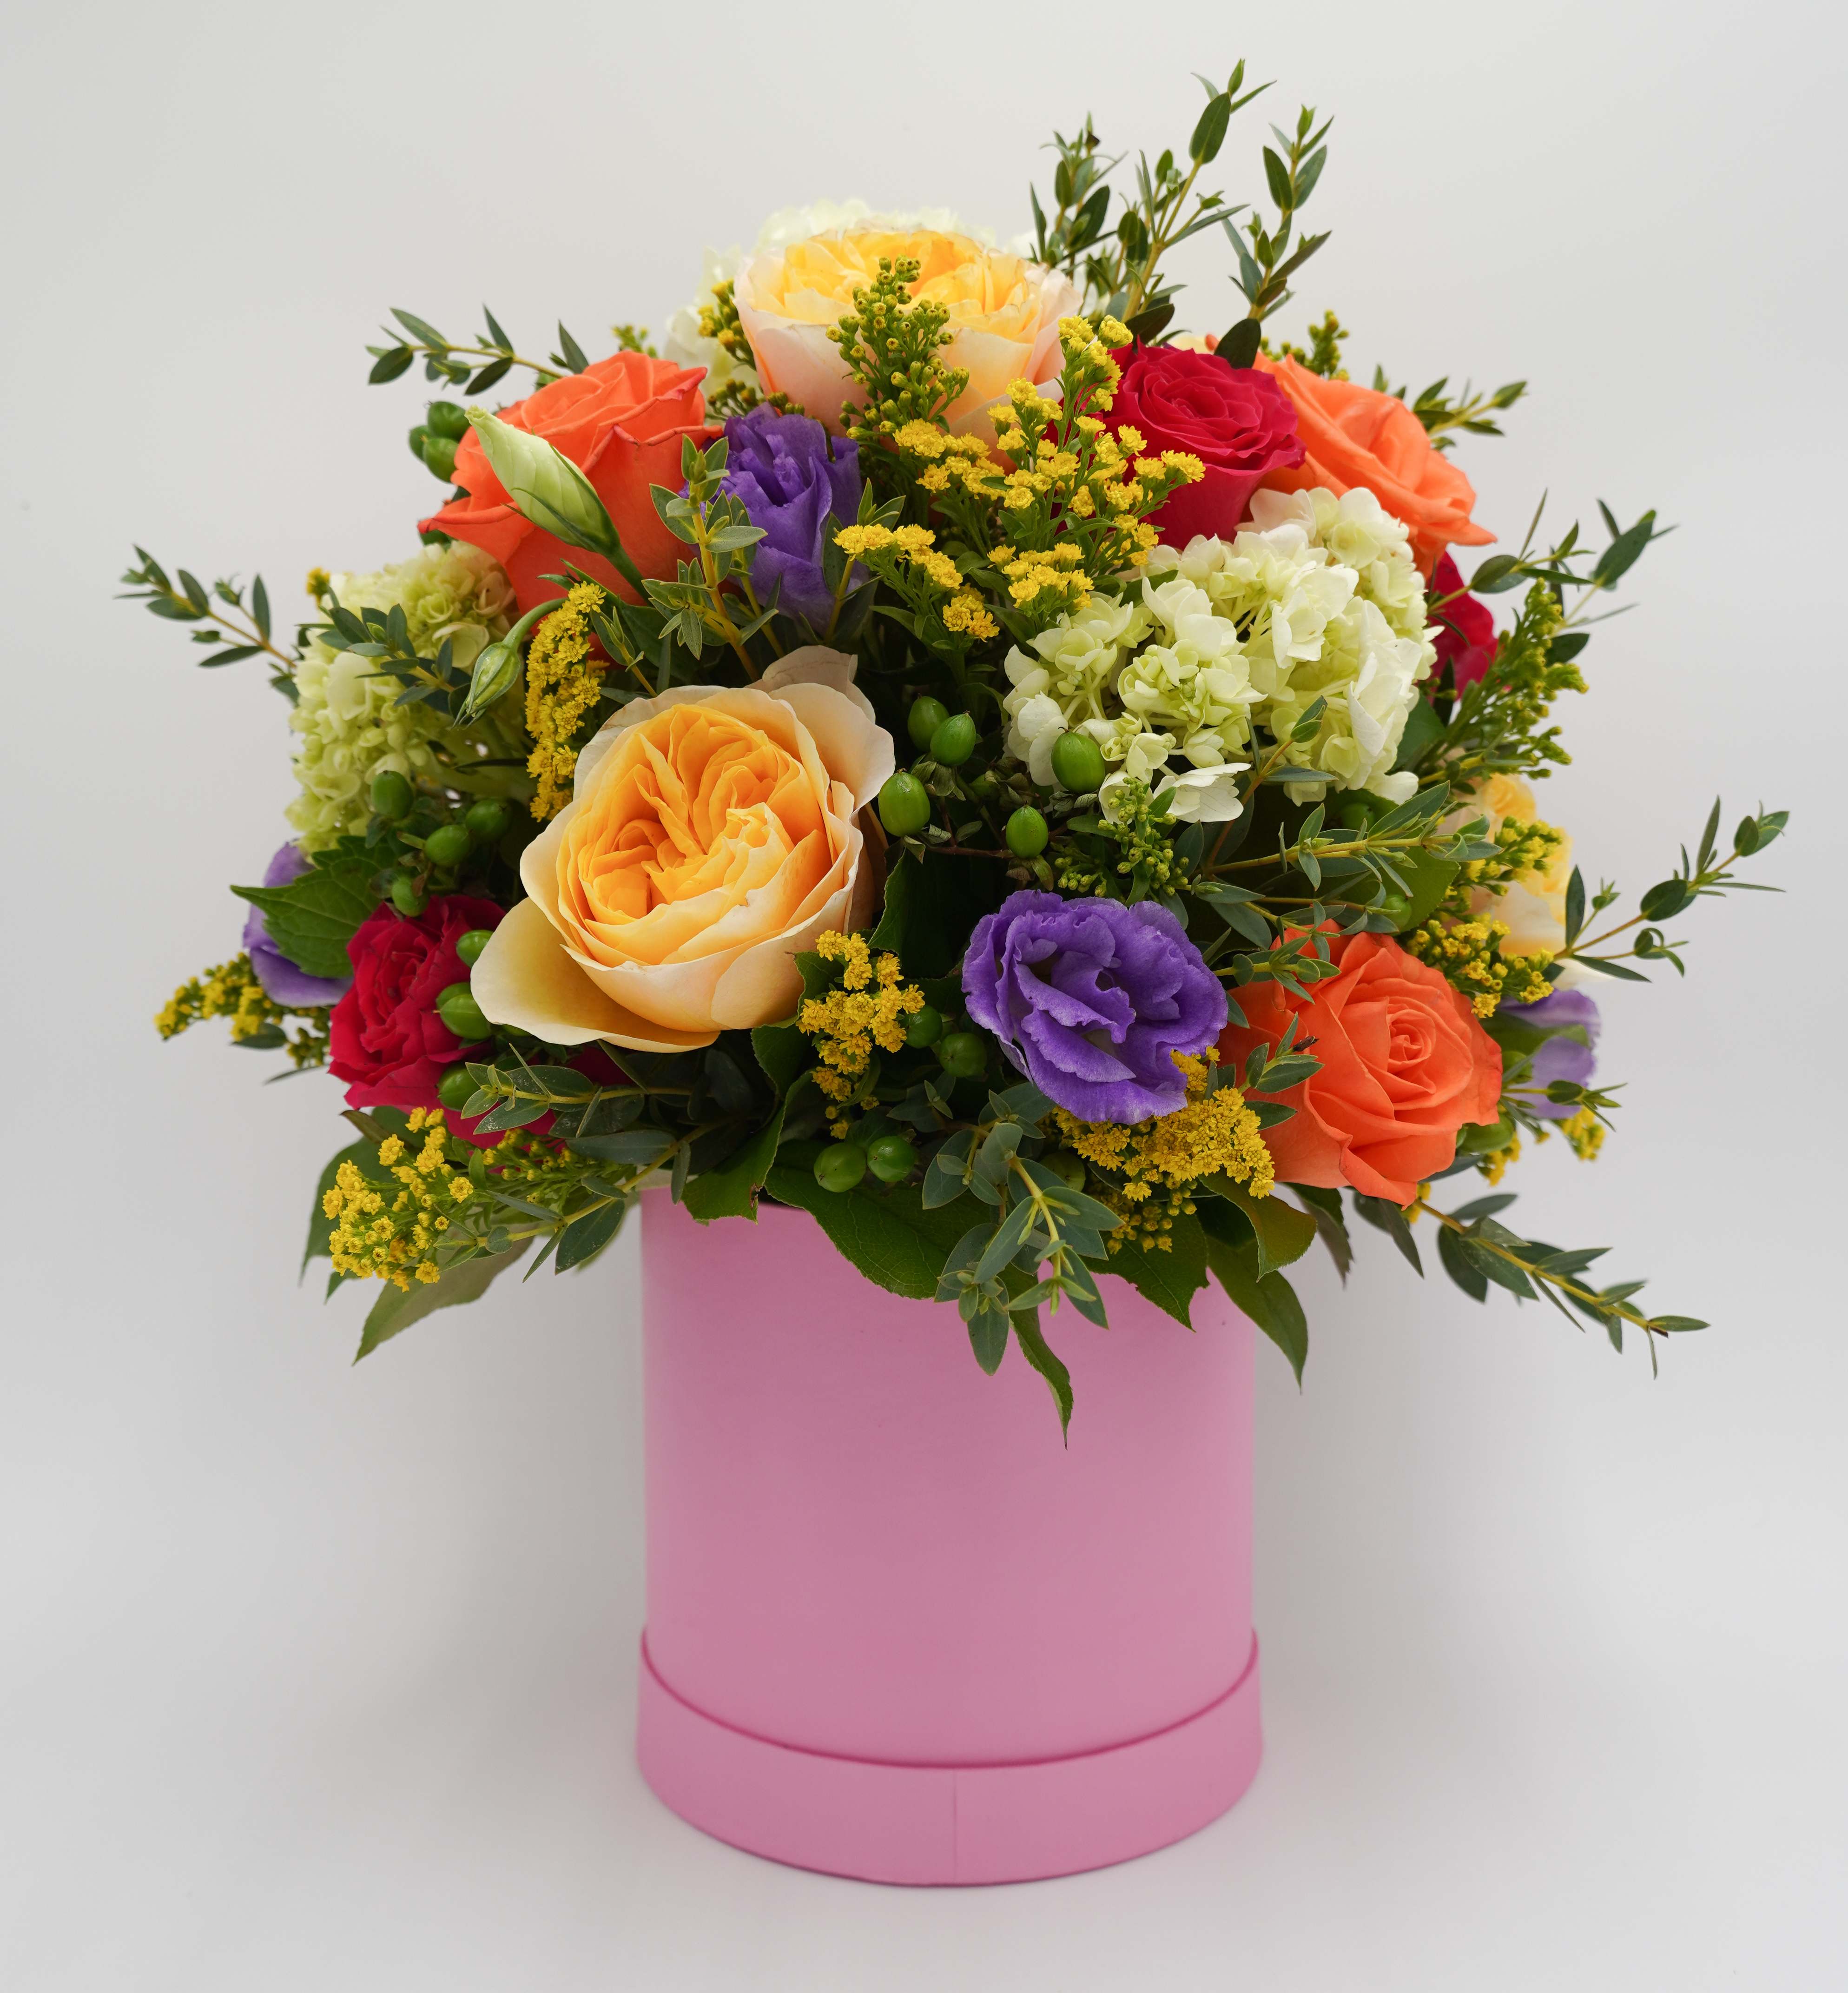 Wonderful Day by Atlanta's Finest Flowers - Orange Roses, Hot Pink Roses, Yellow Garden Roses, Hydrangea, Hypericum, Lisianthus, Yellow Aster, and Mix Geenery *Pink Box Material: Cardboard 7 x 7*